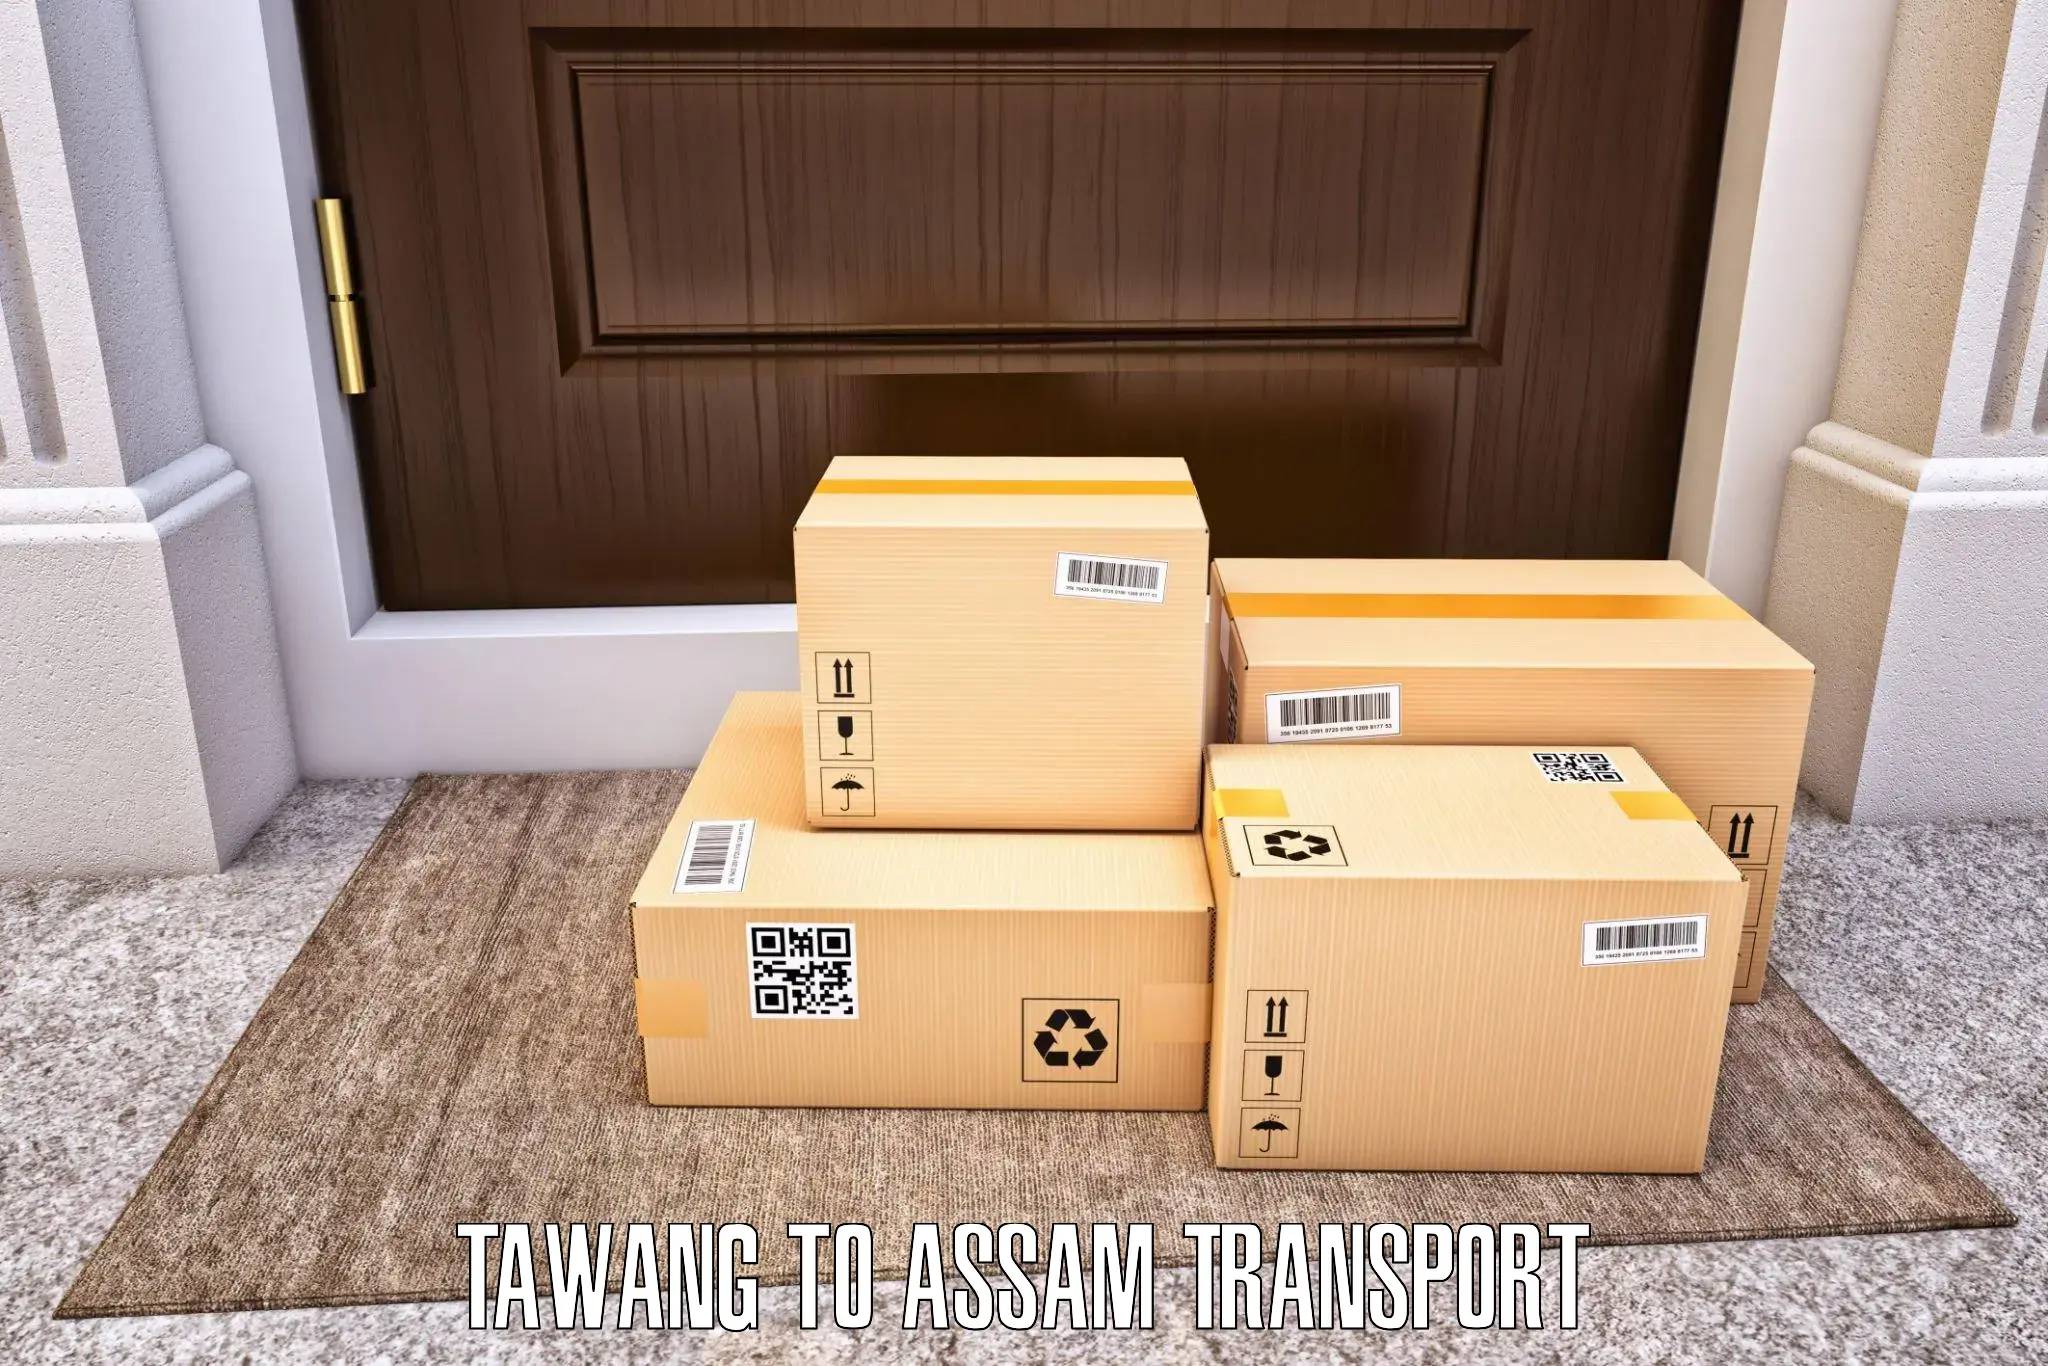 Daily transport service Tawang to Assam